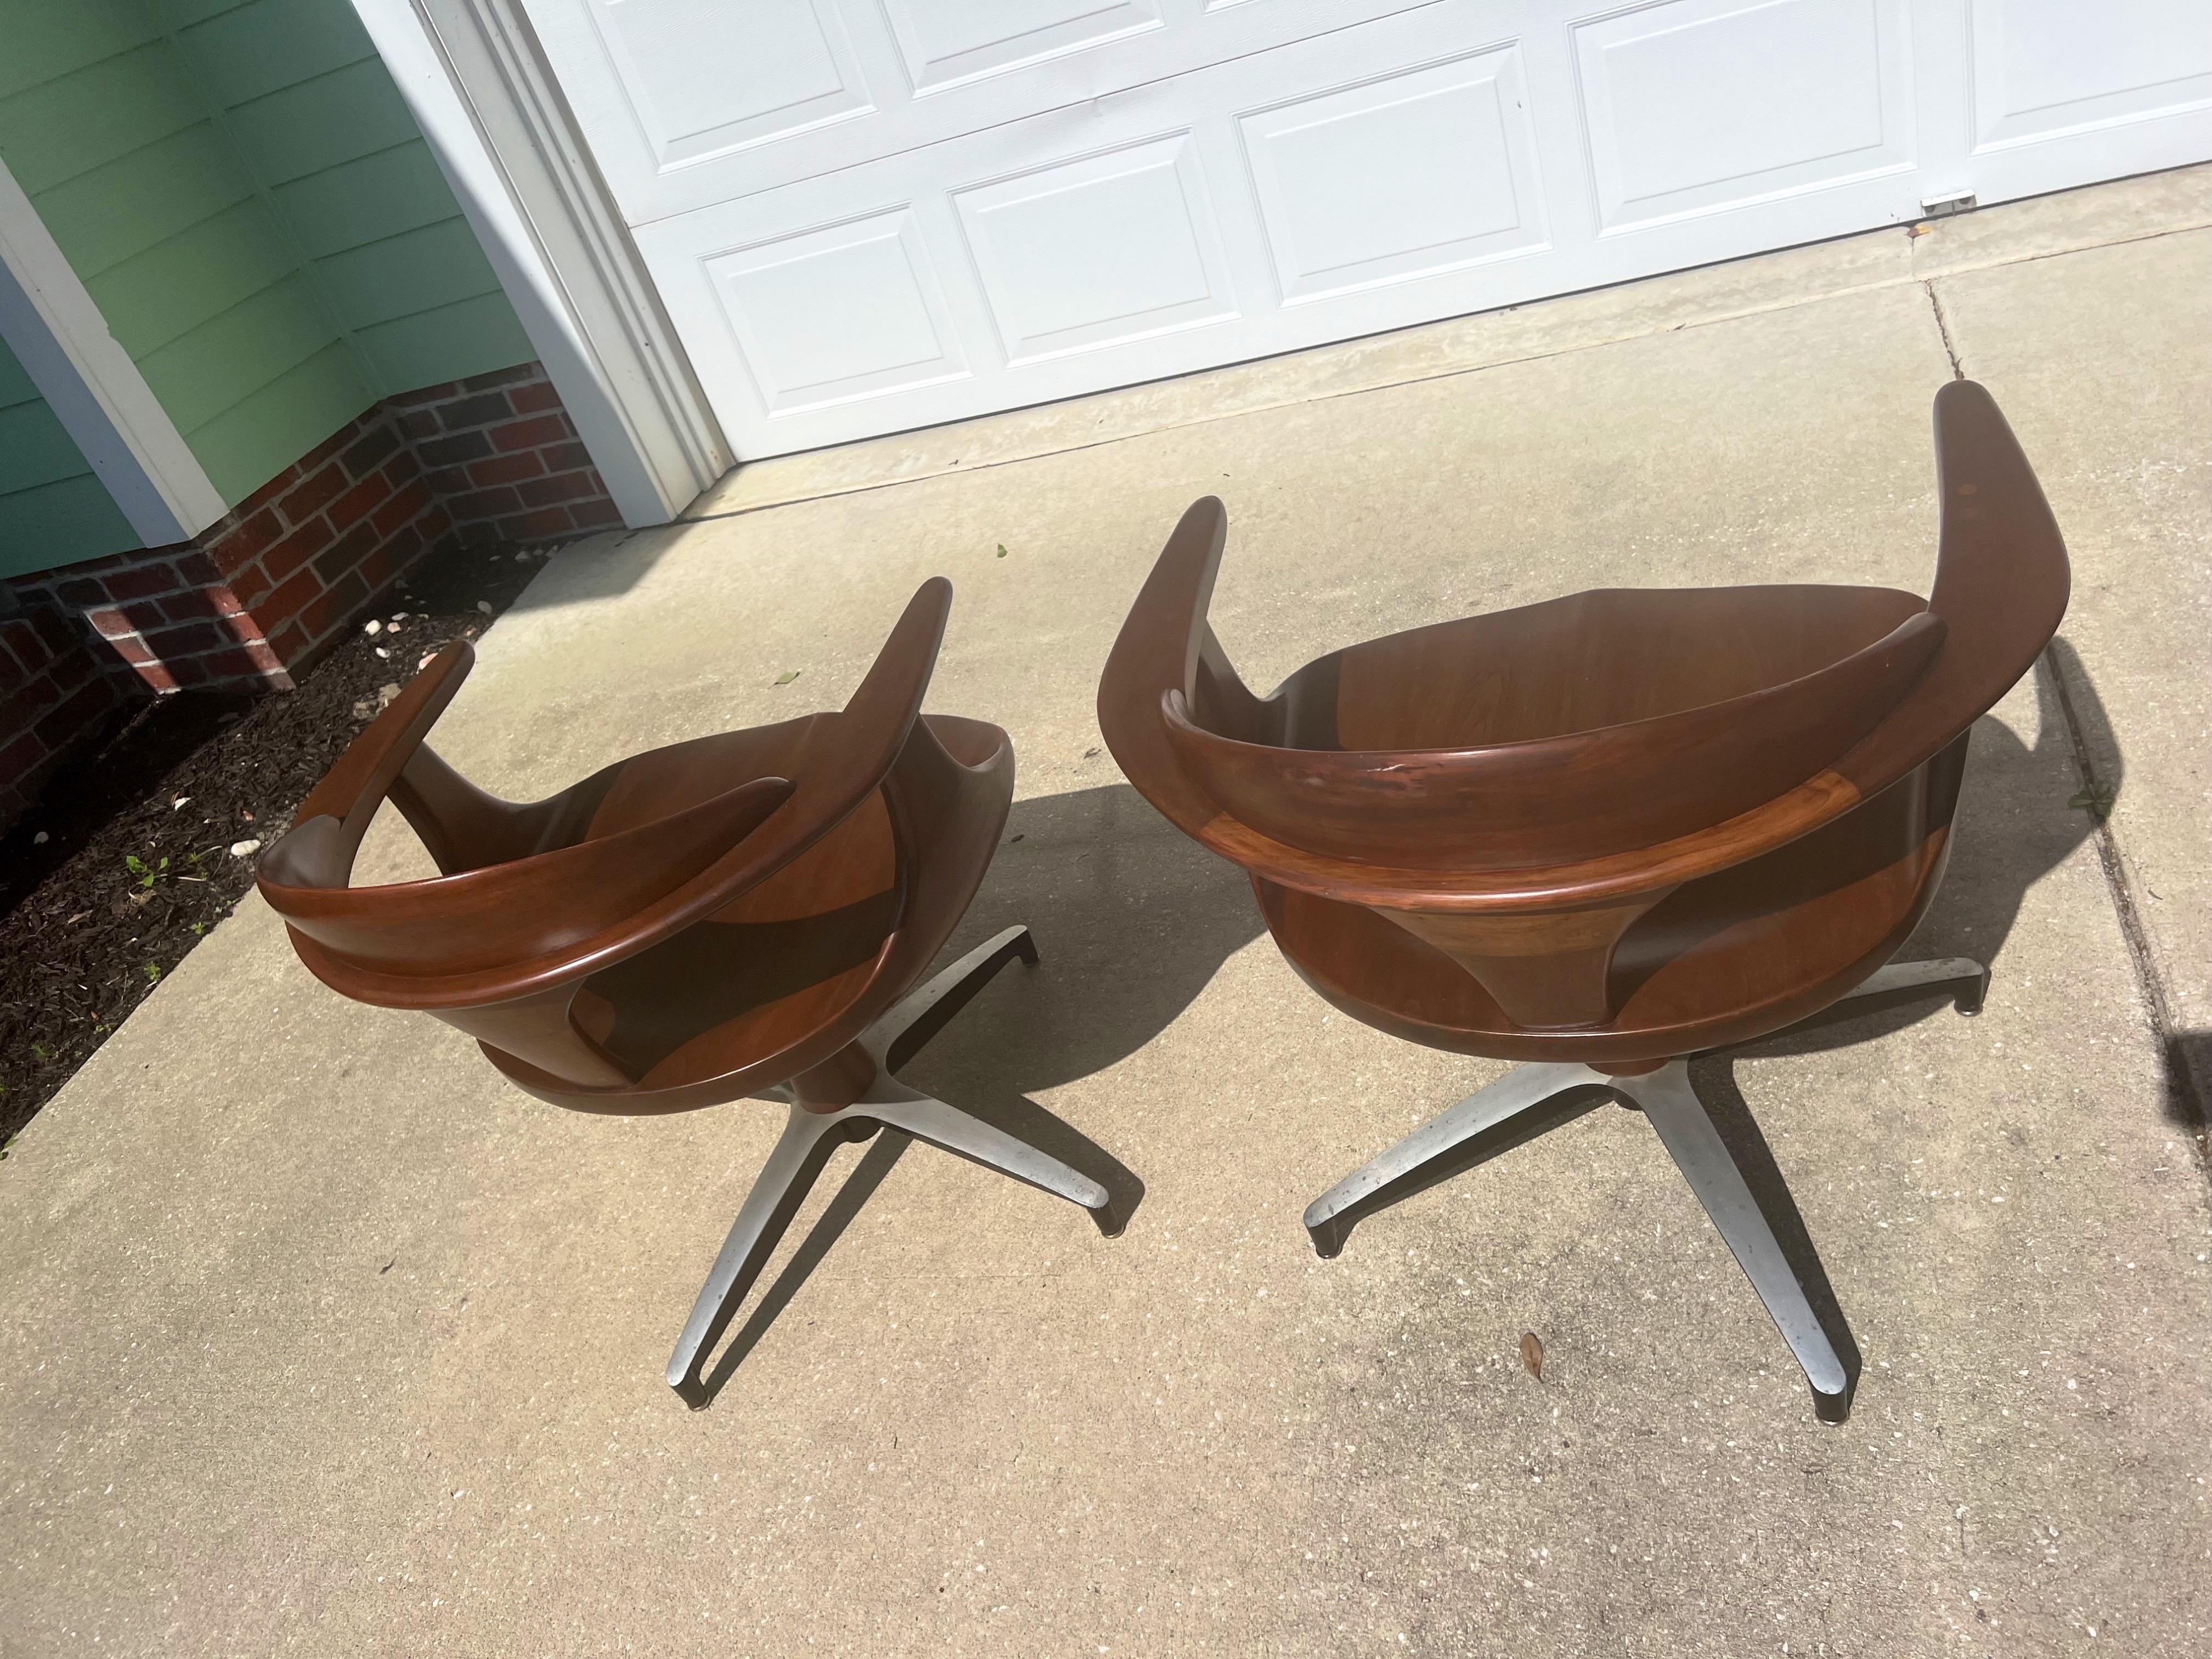 1960s Heywood Wakefield “Cliff House” Dining Table and Chairs, a Set of 5 For Sale 1